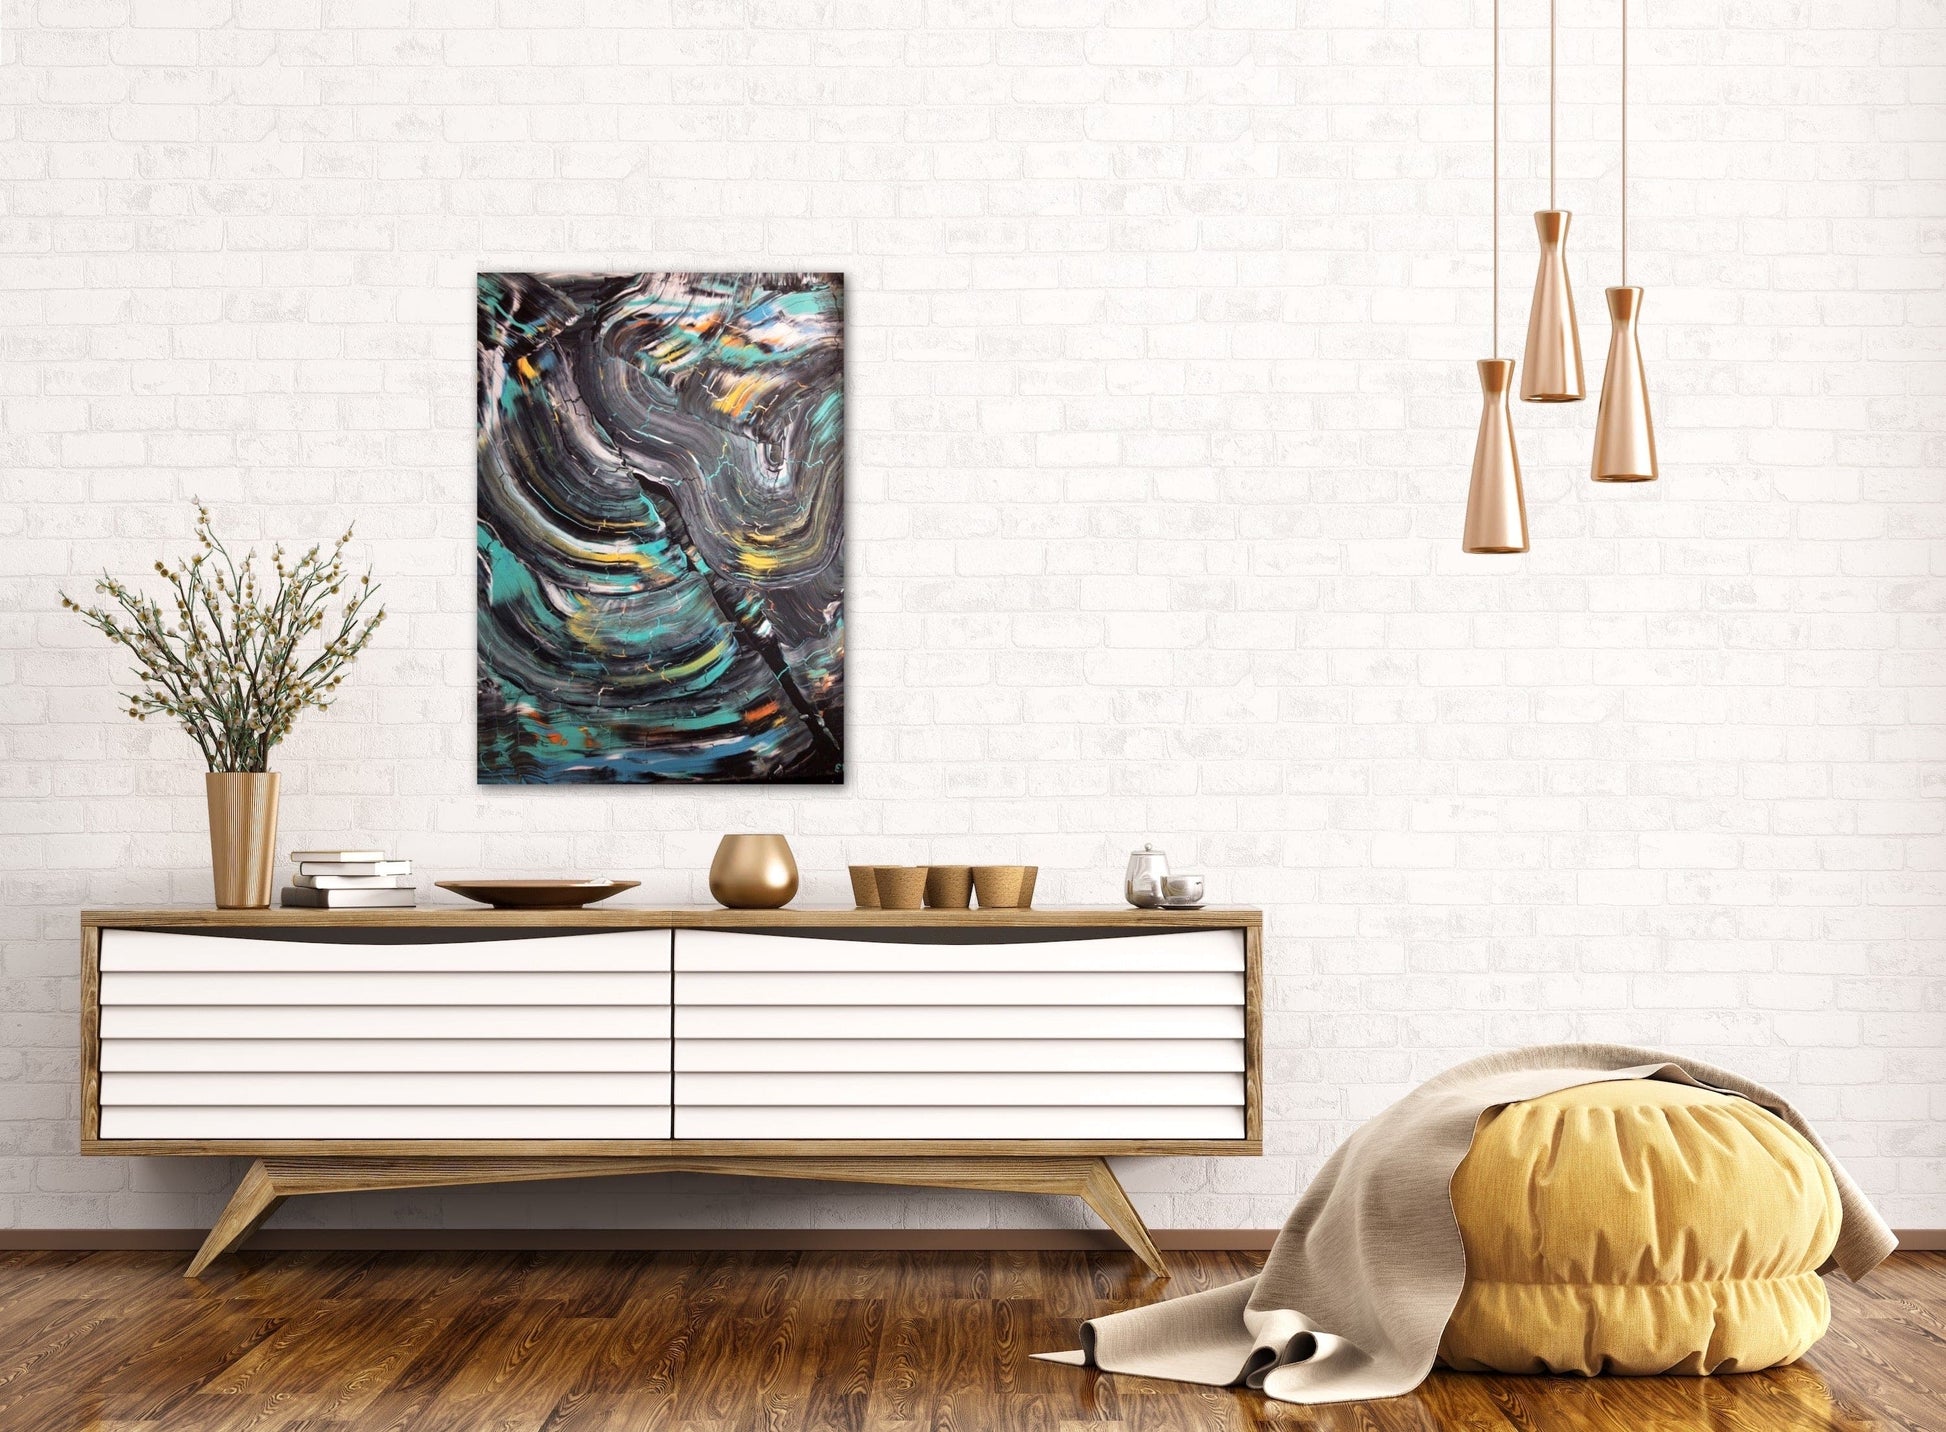 Roads Of Life - Medium Size, Modern Abstract Original Design On A Canvas, Painting by Art With Evie